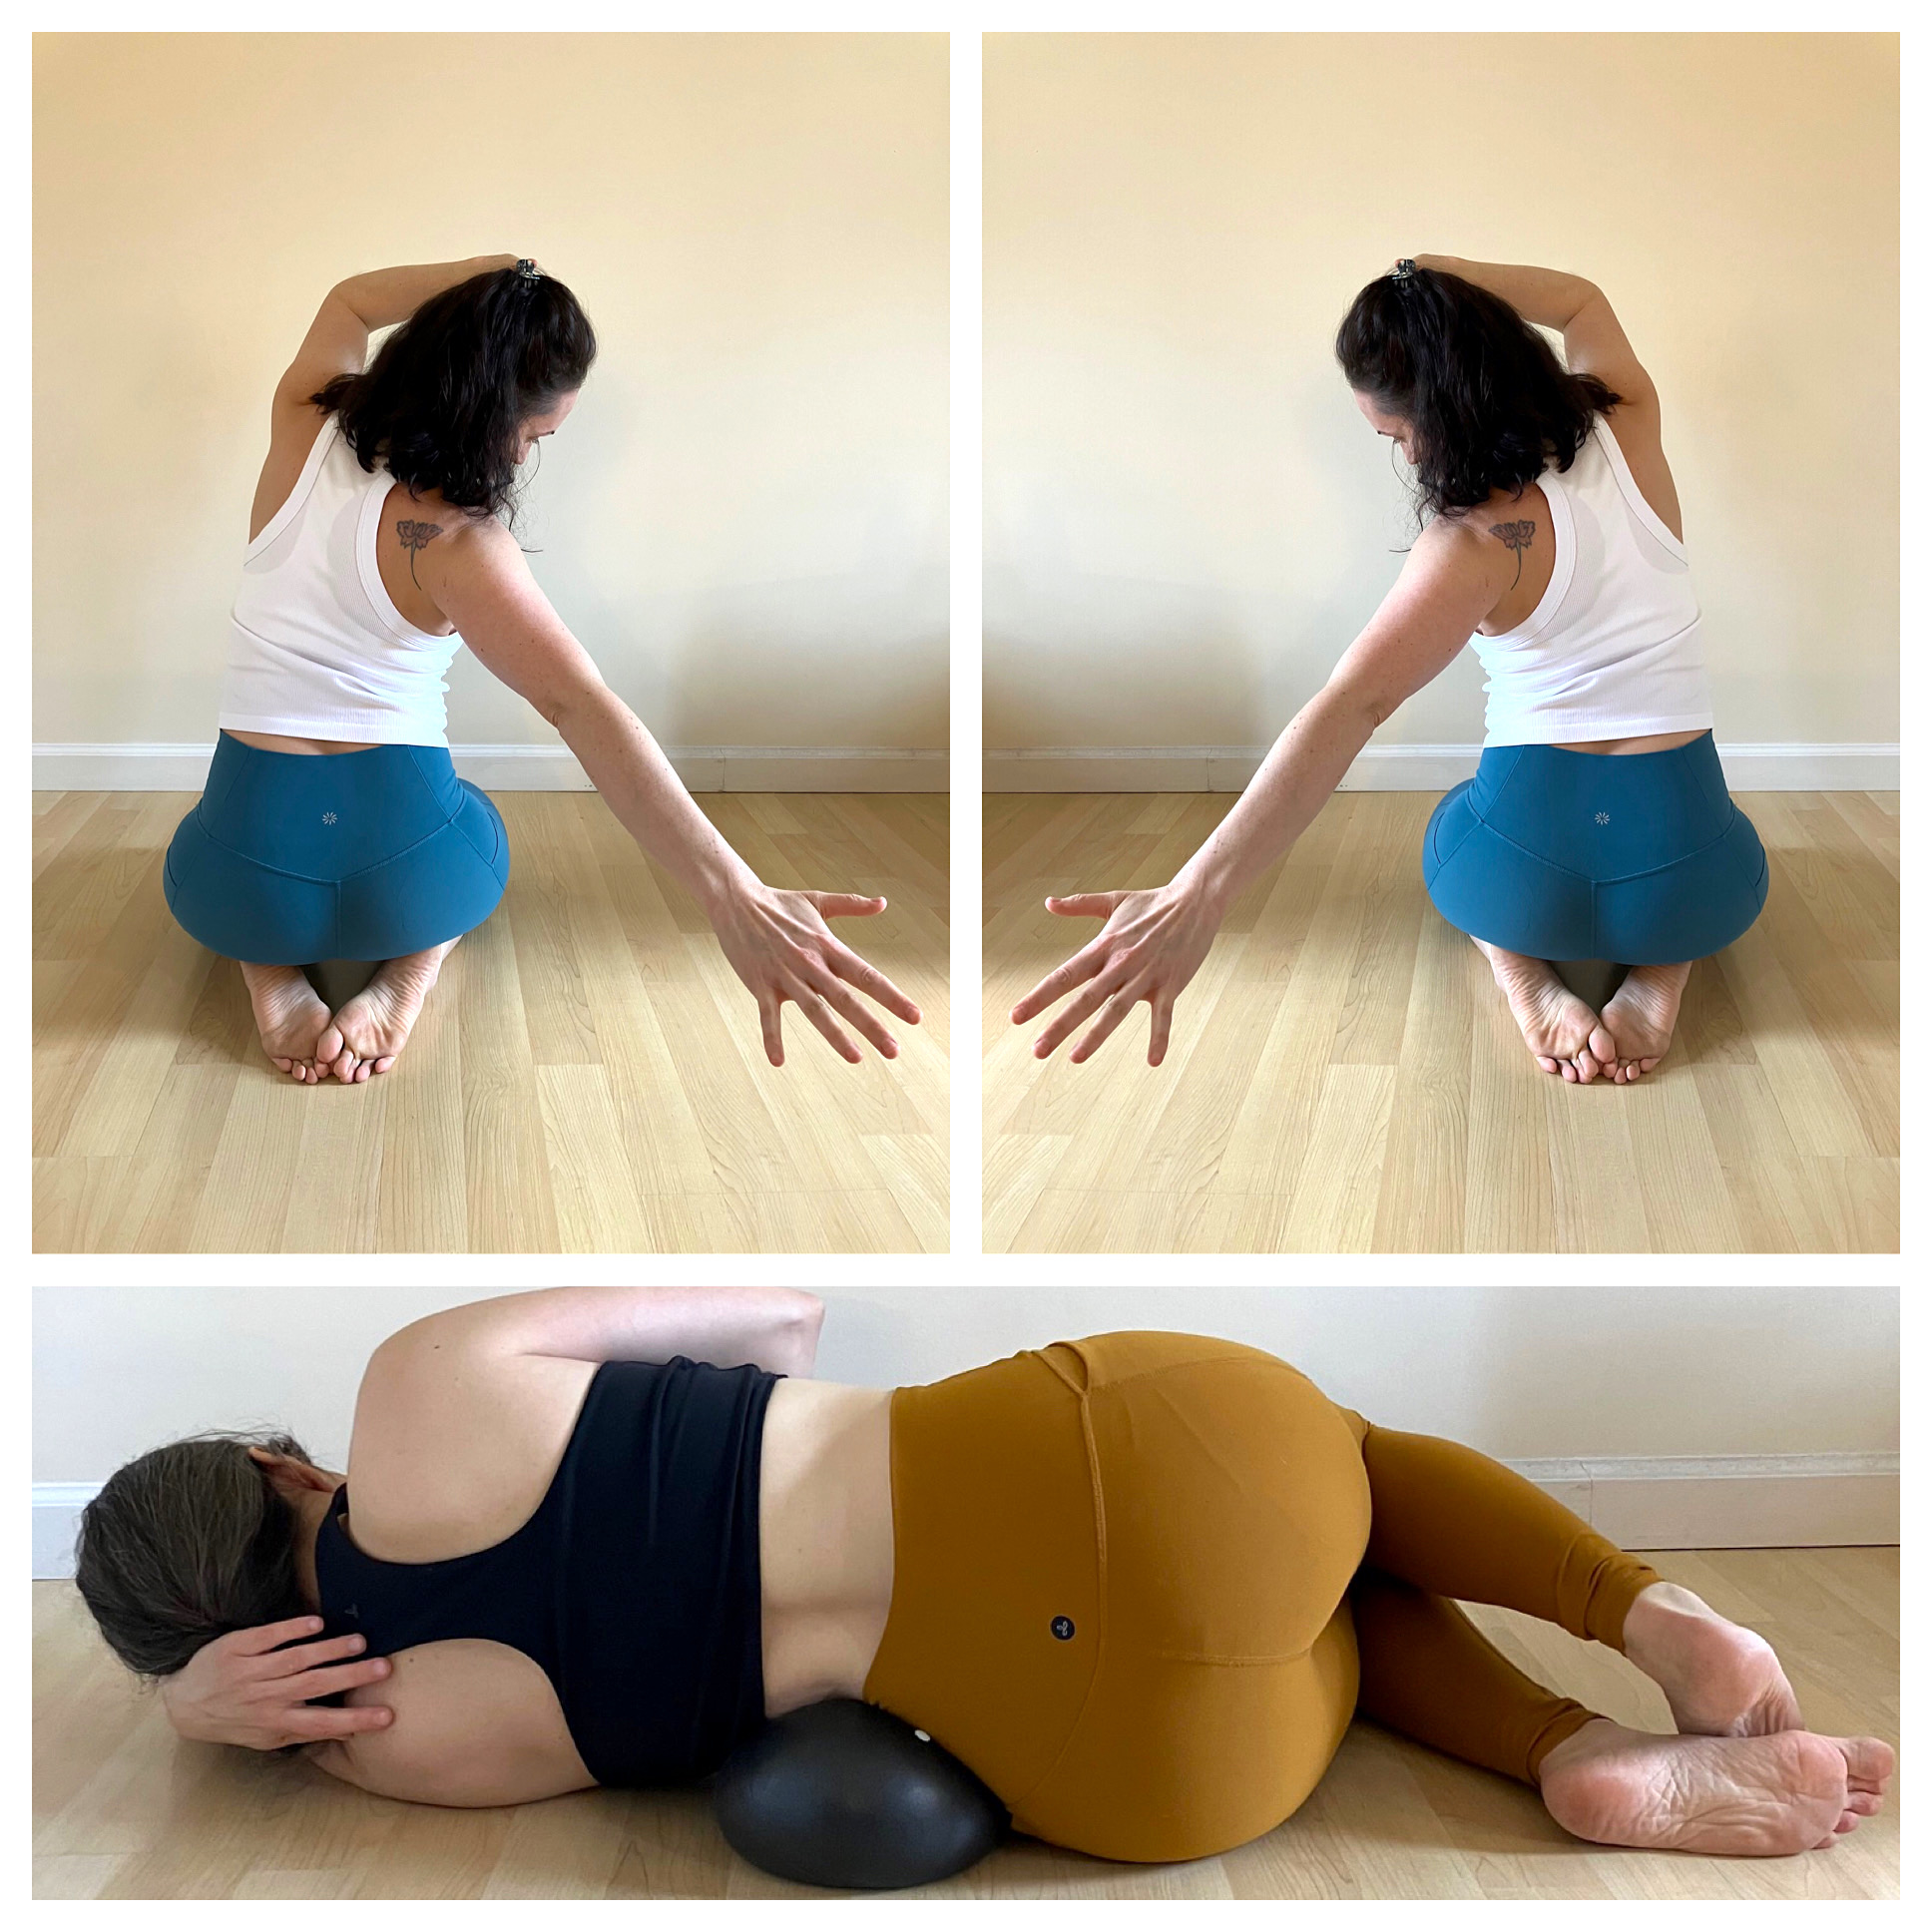 two bodies, one in mirror image demonstrating techniques for rolling and mobility for the spine